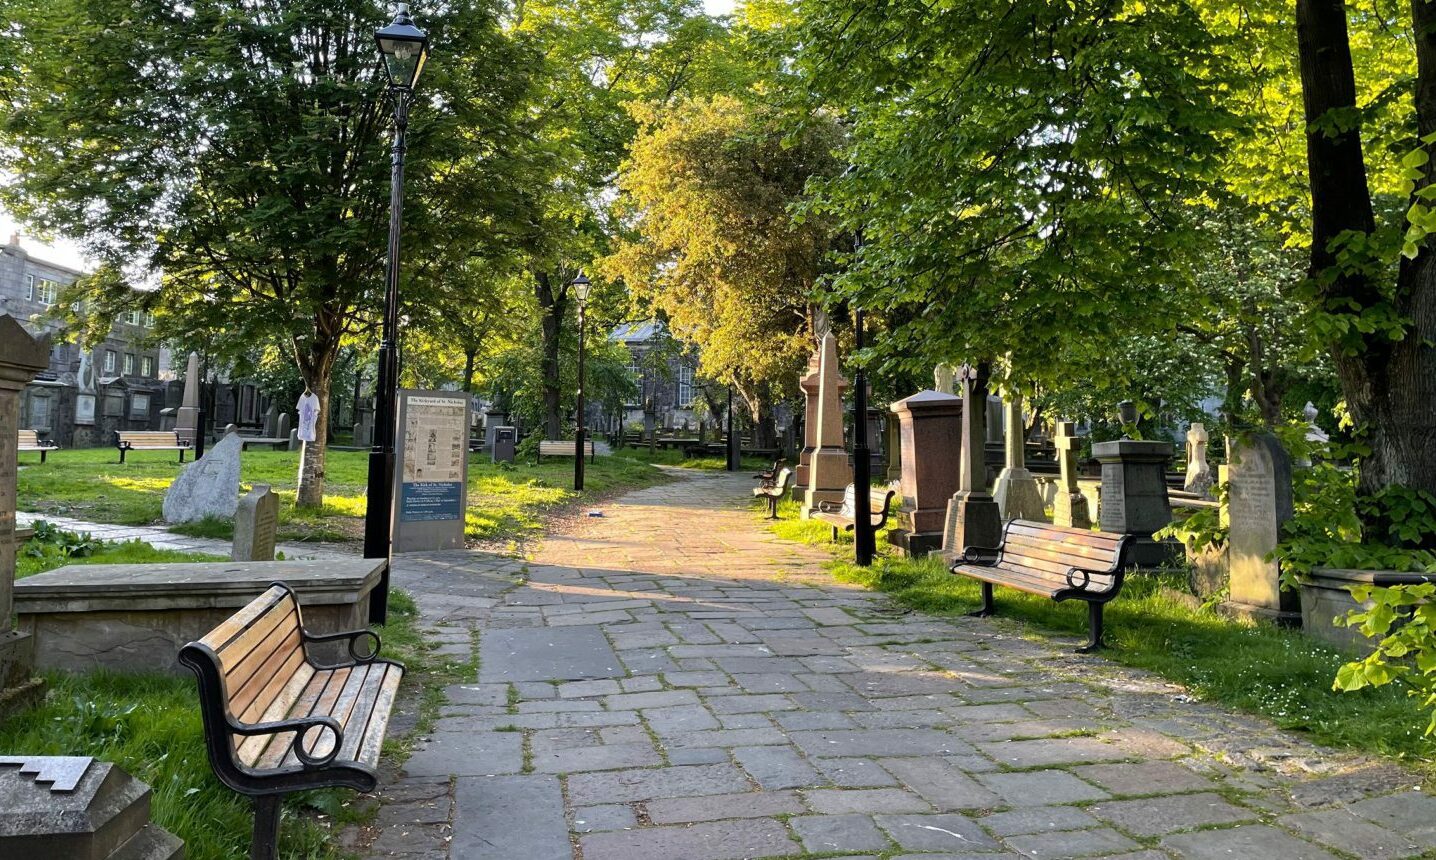 Walkway and benches inside St Nicholas graveyard.